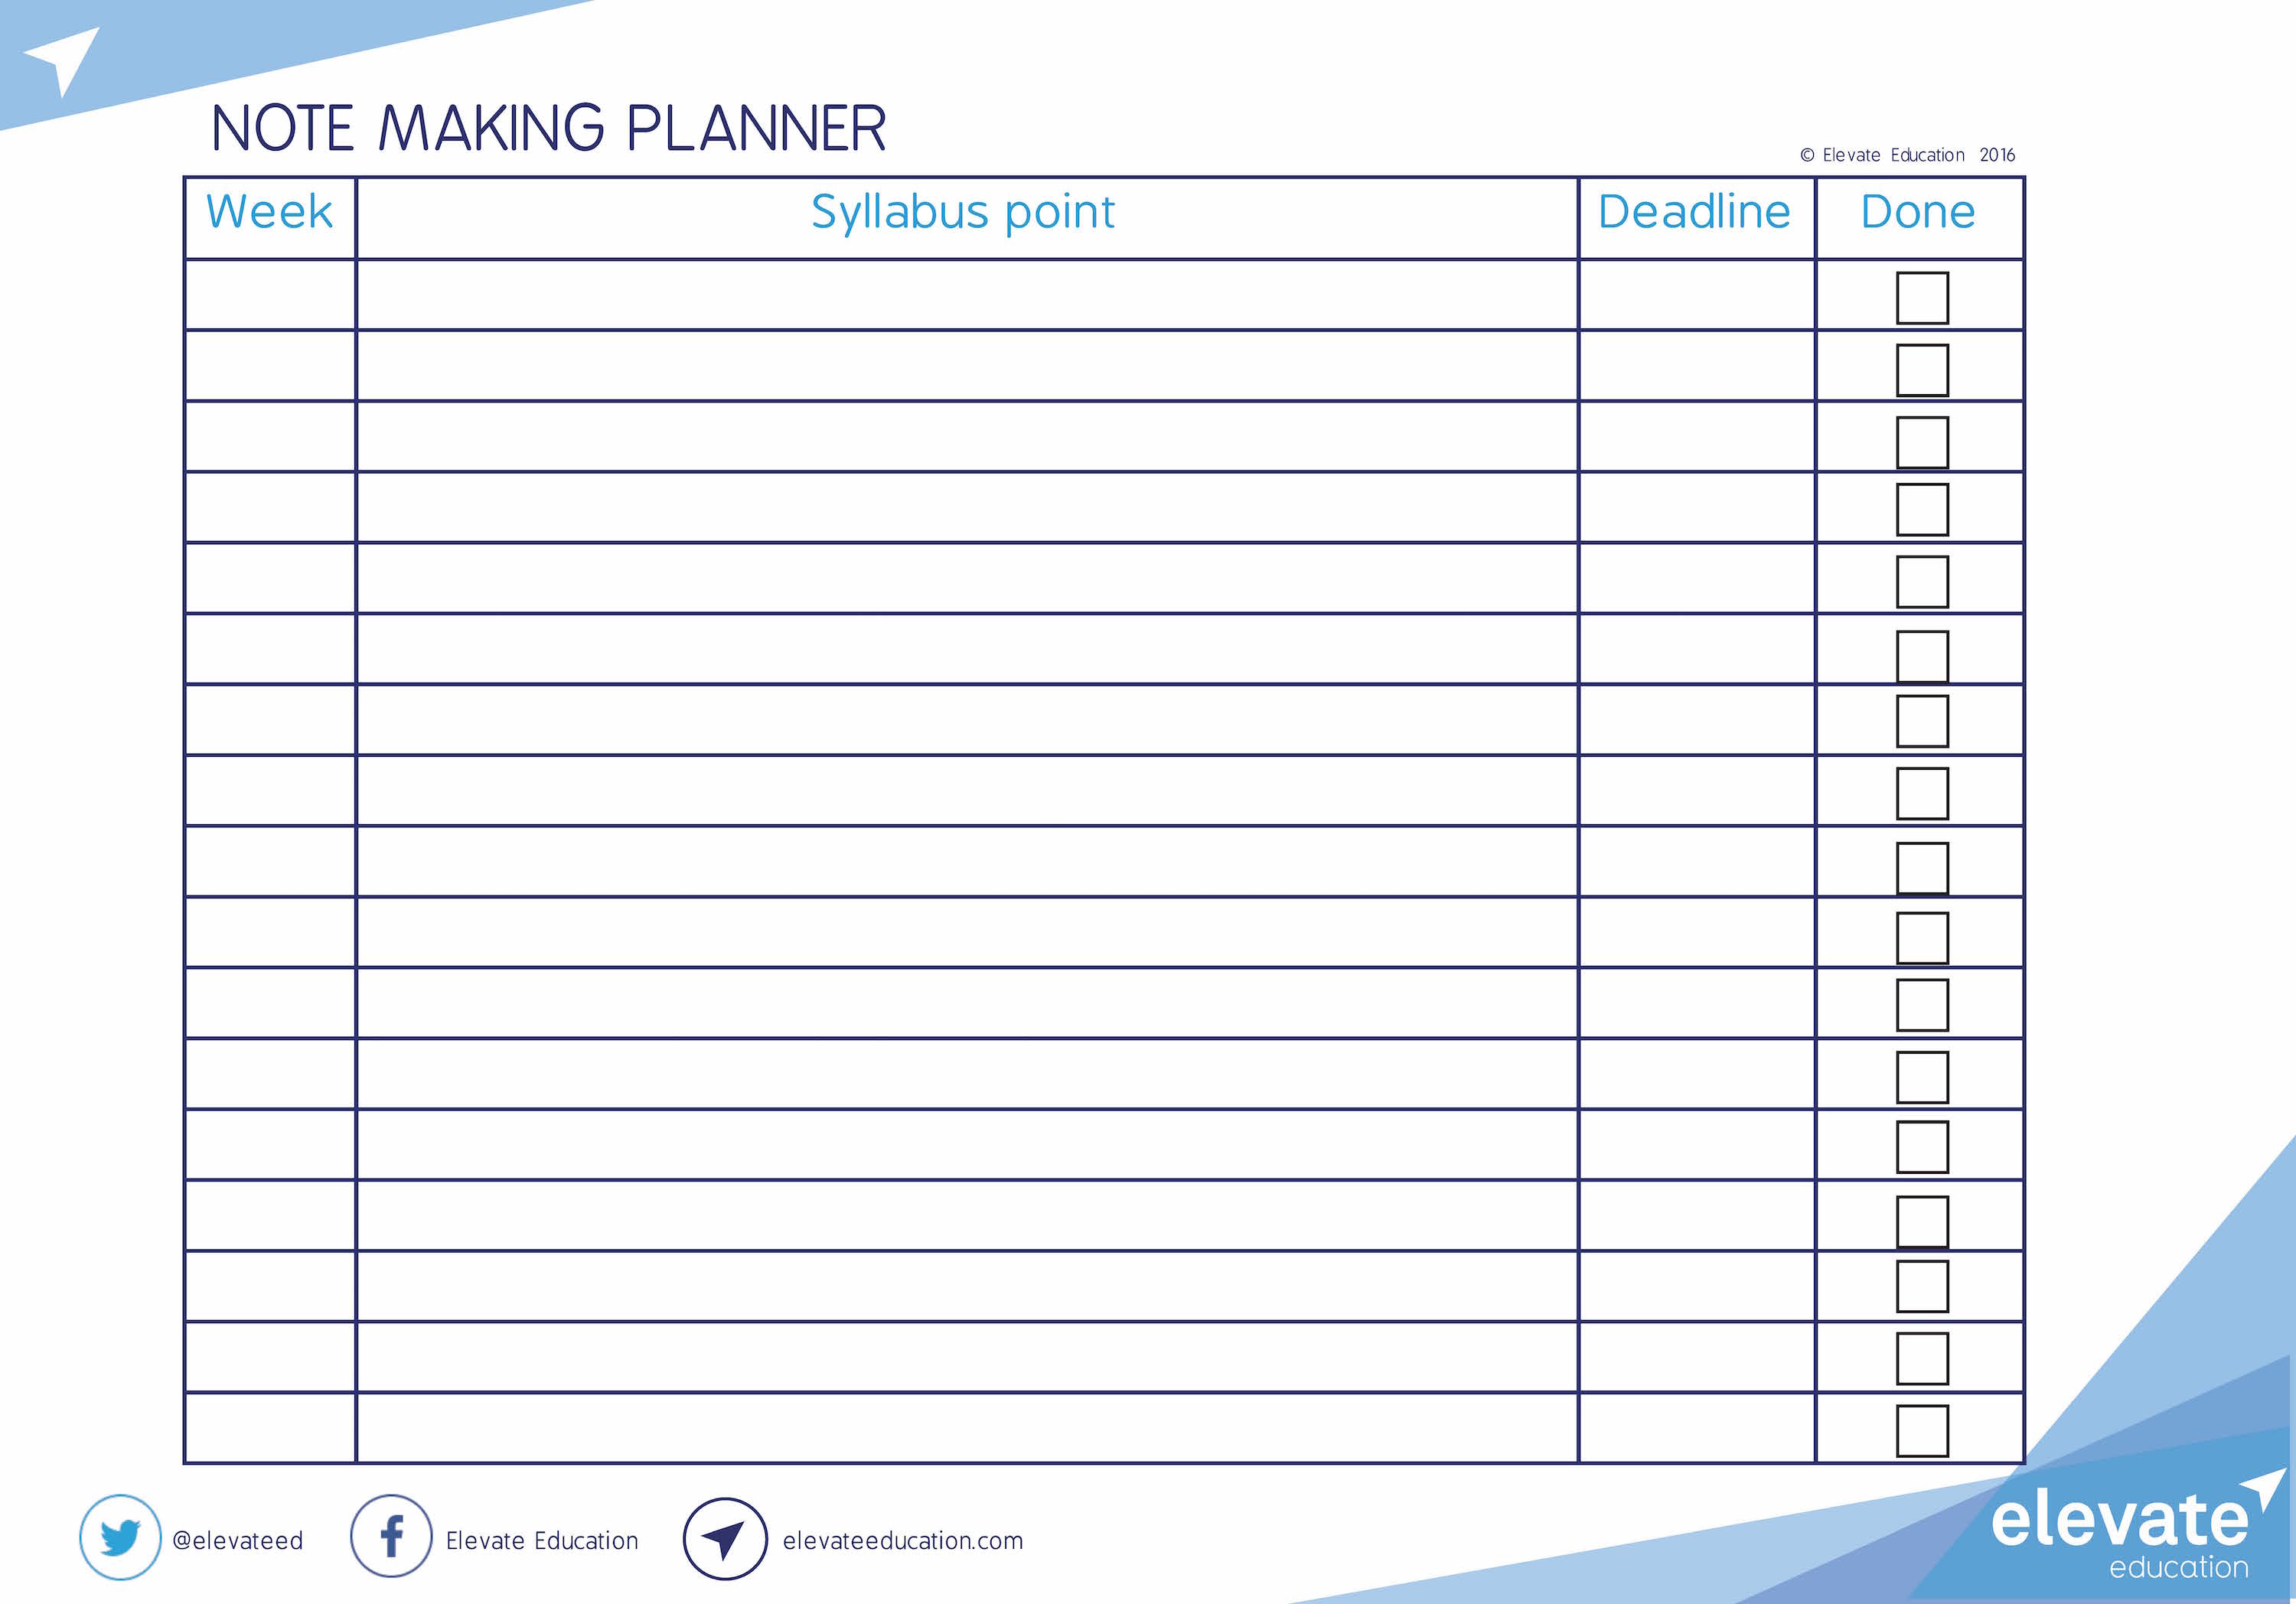 Note making planner